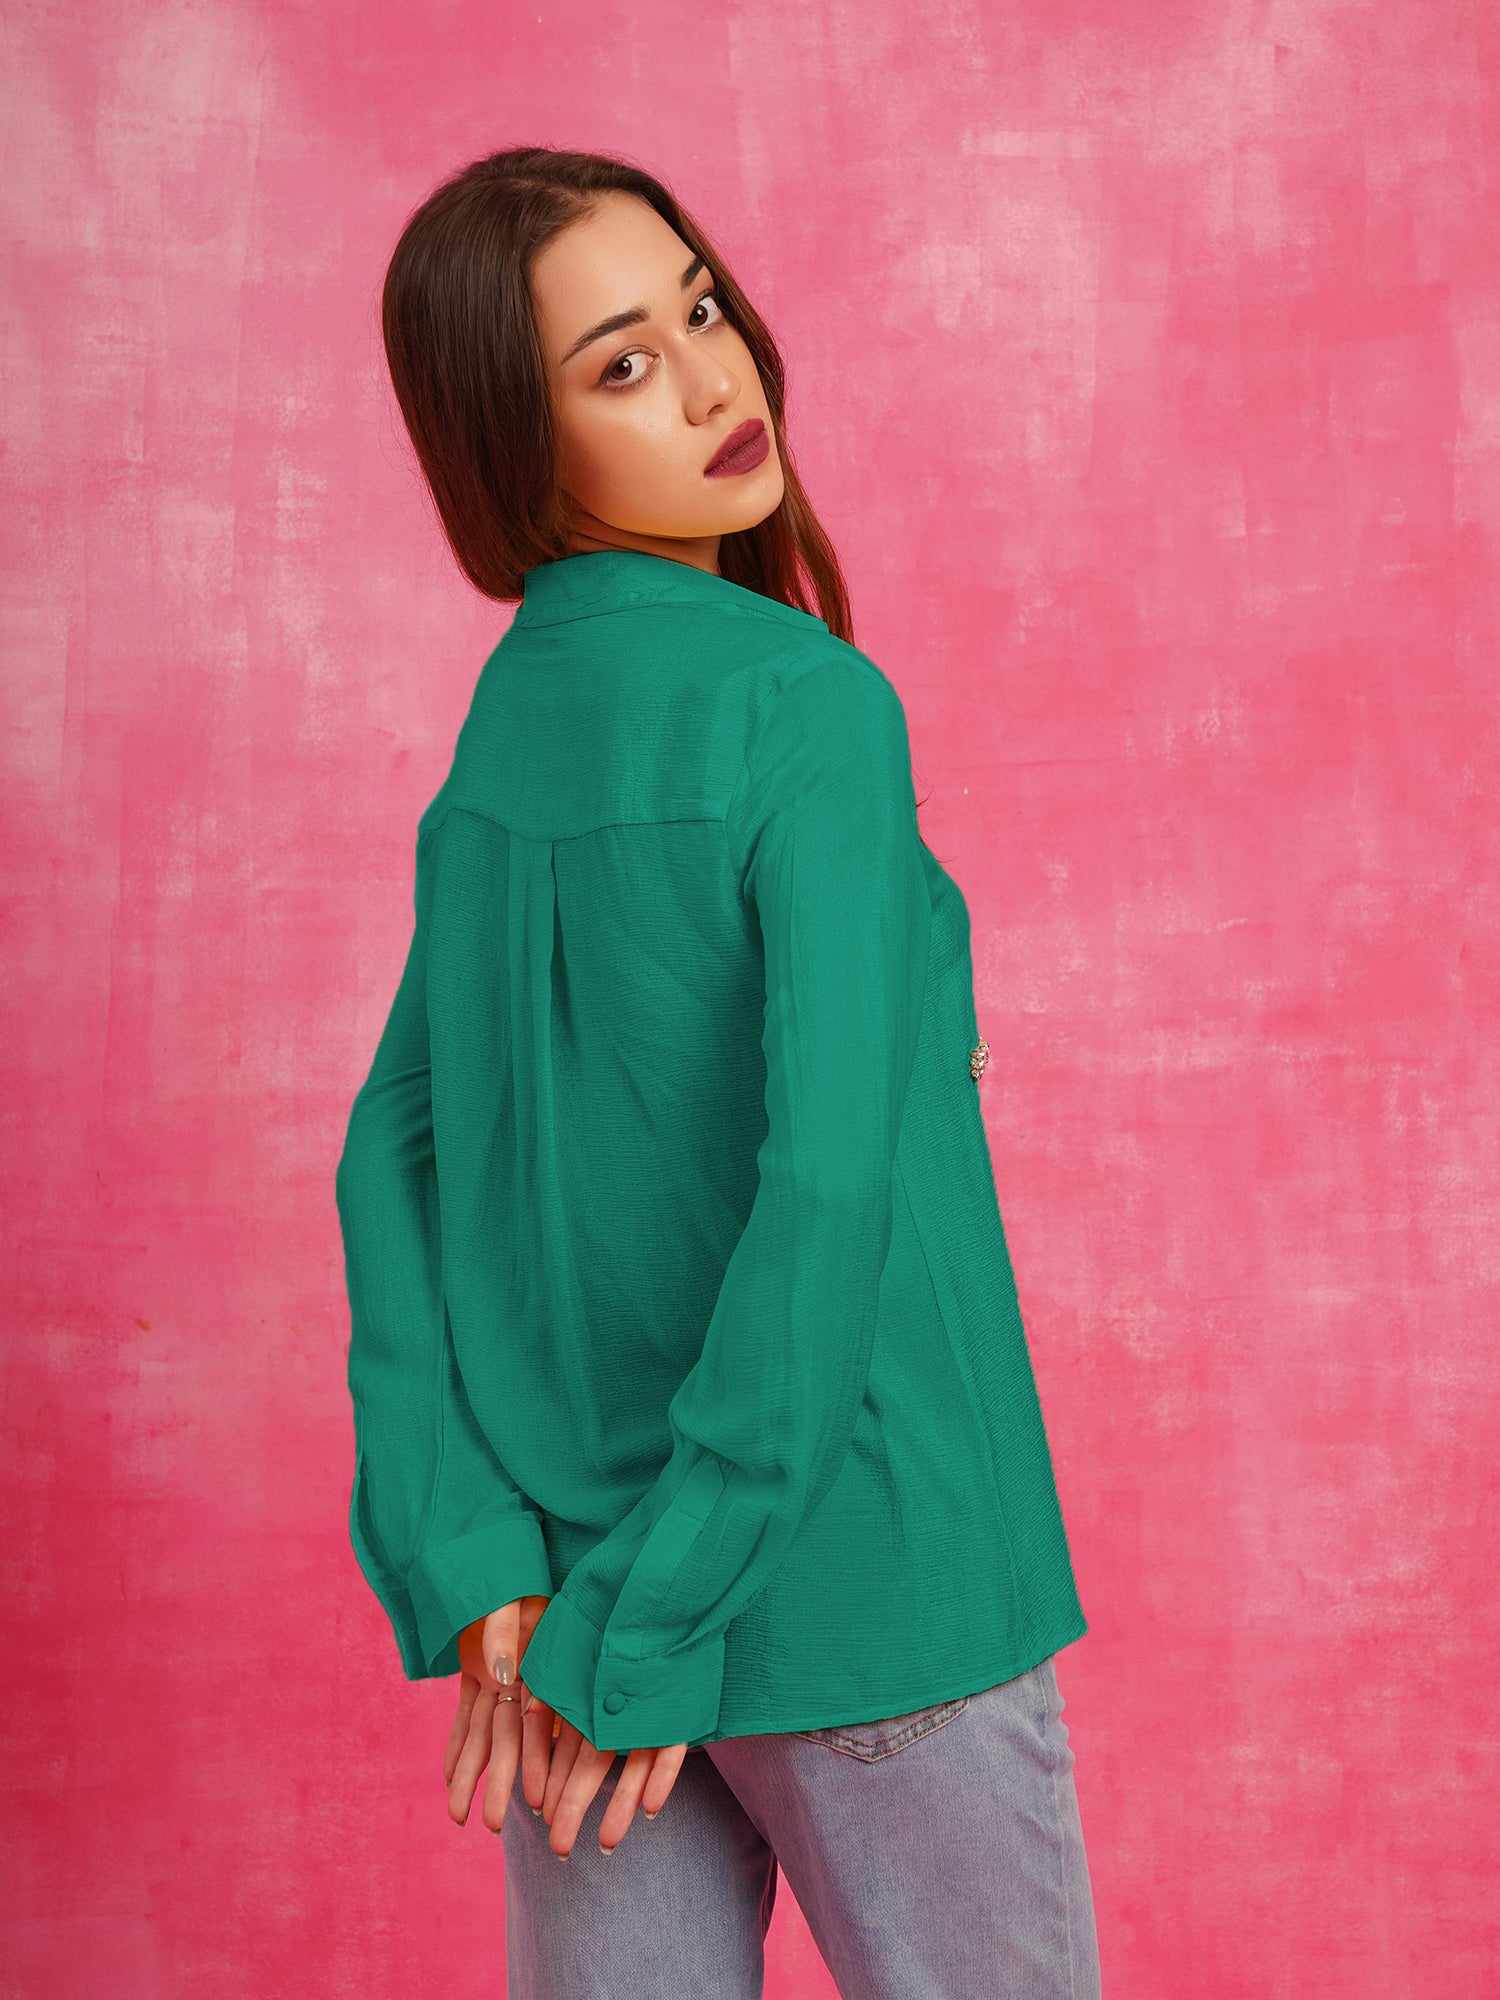 deluxe embellished green shirt  